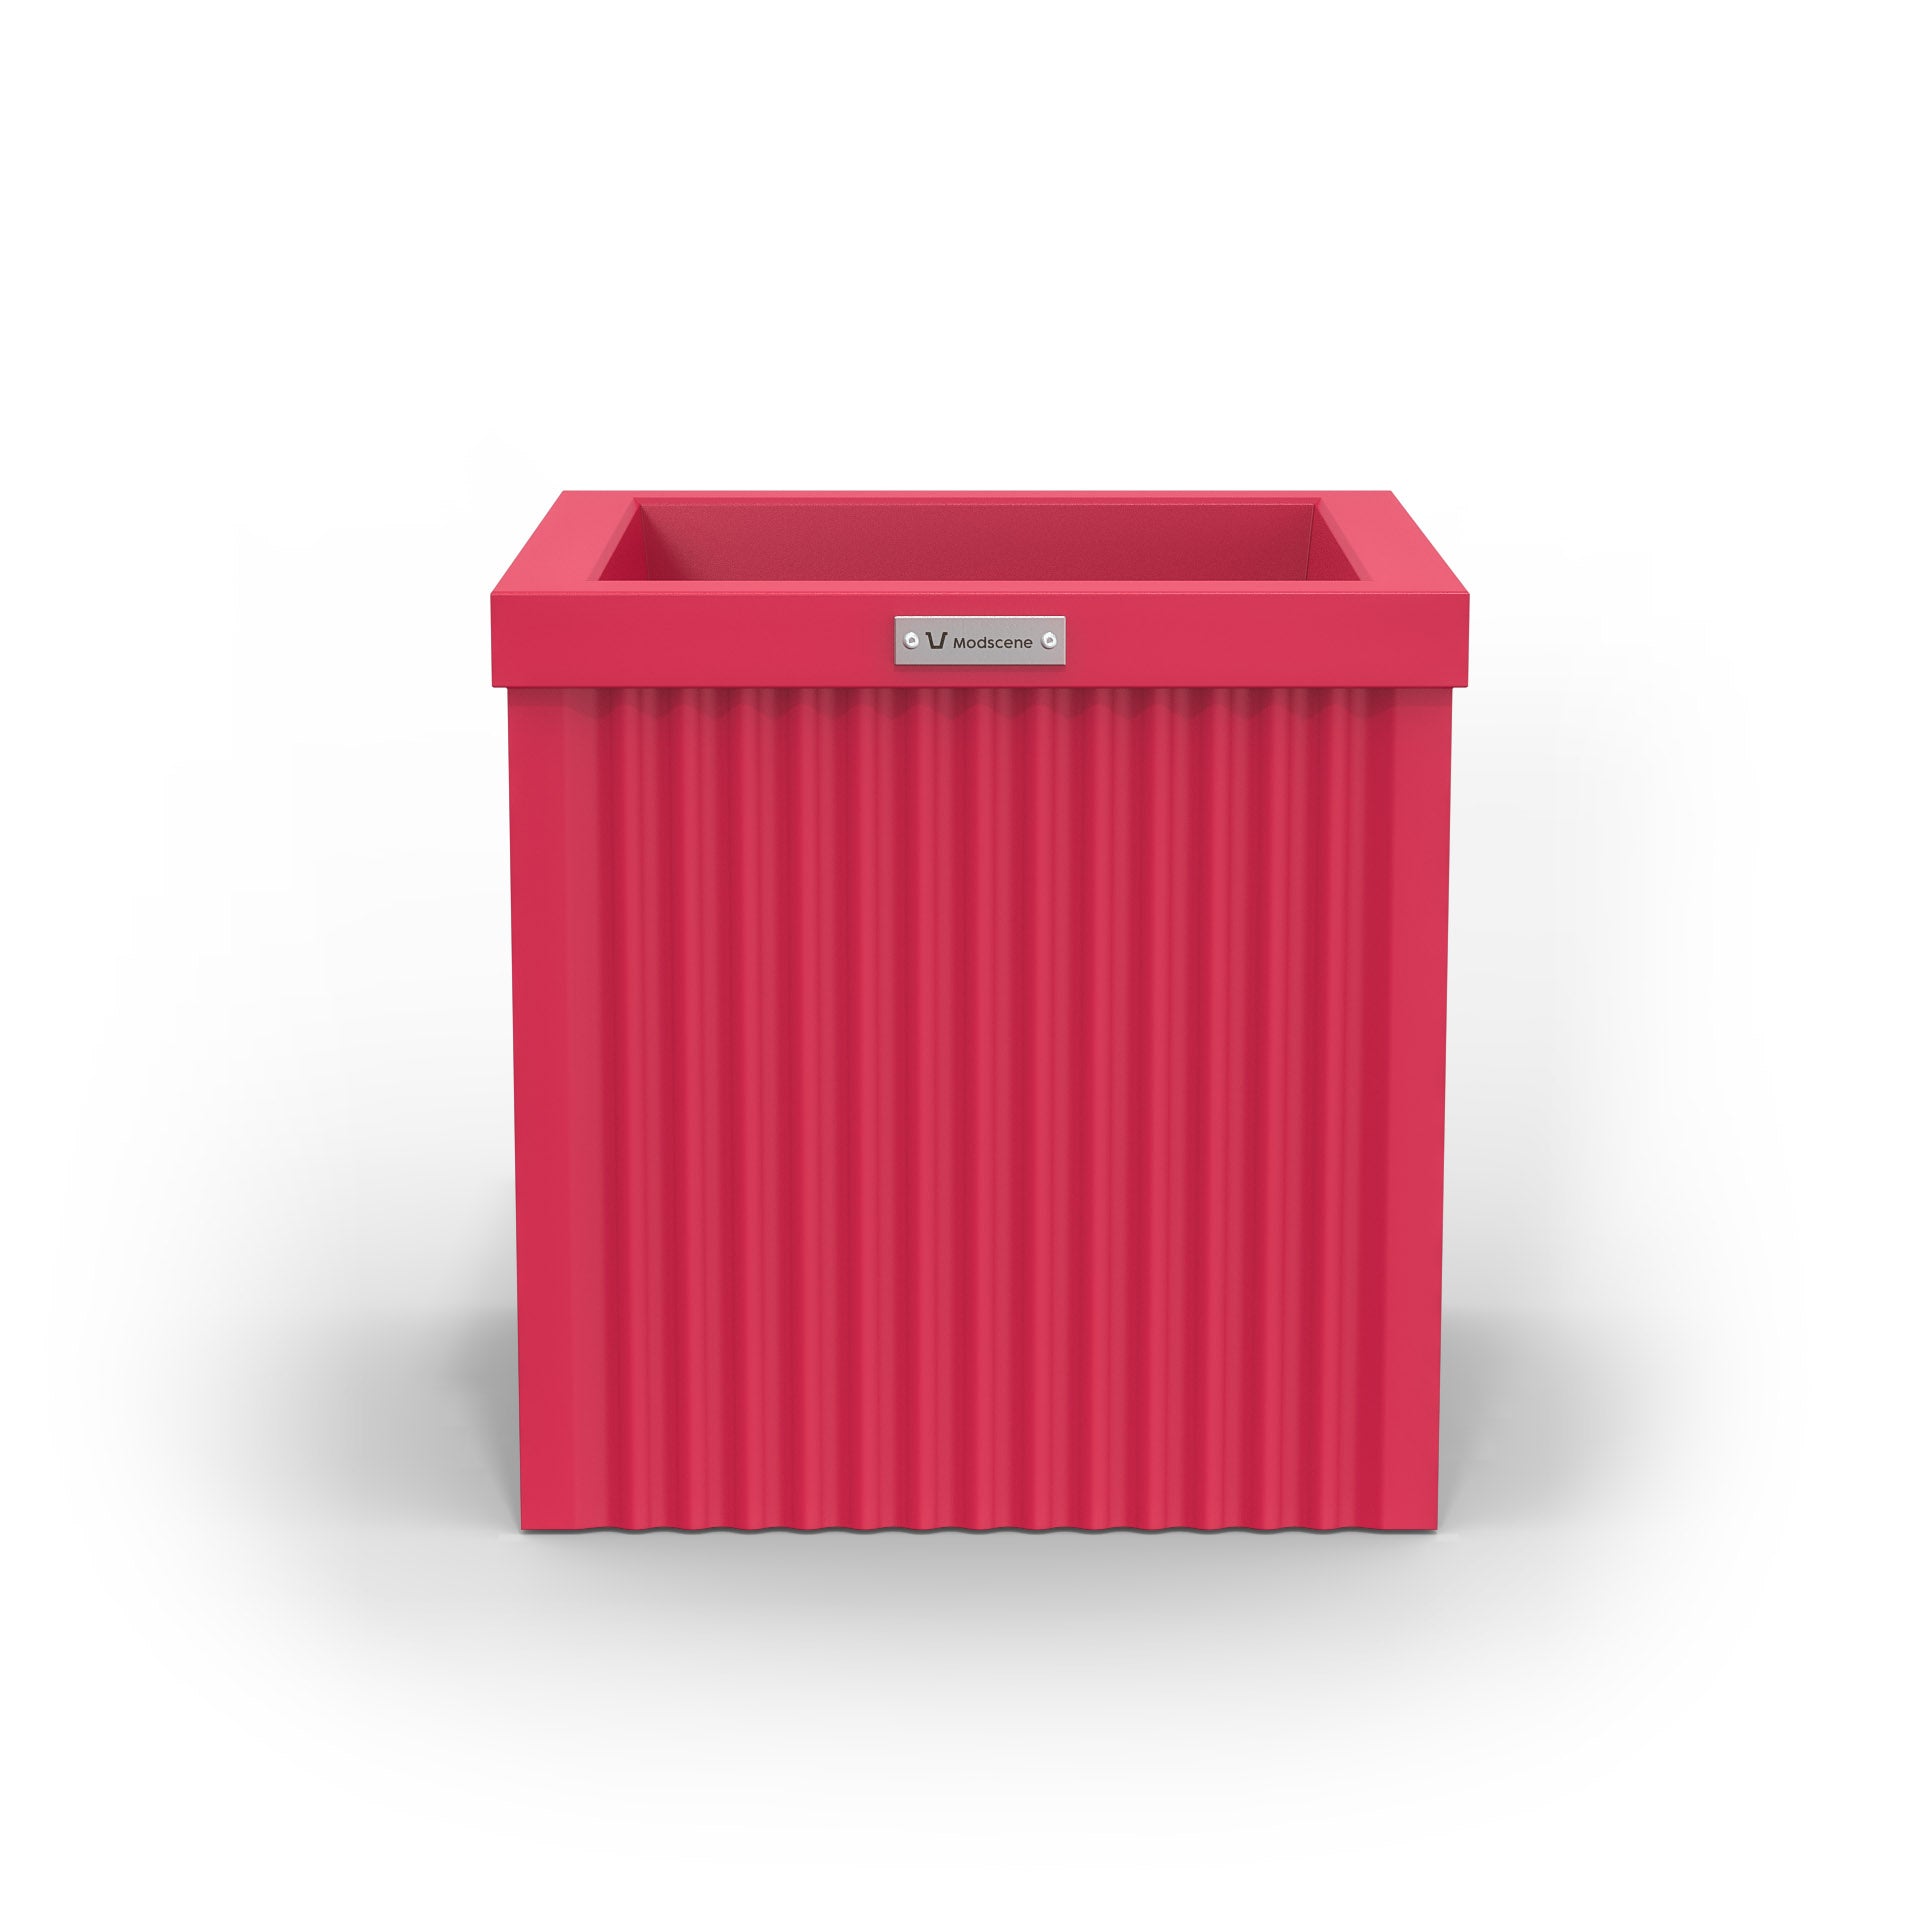 A corrugated square planter pot. The pot planter is pink in colour.